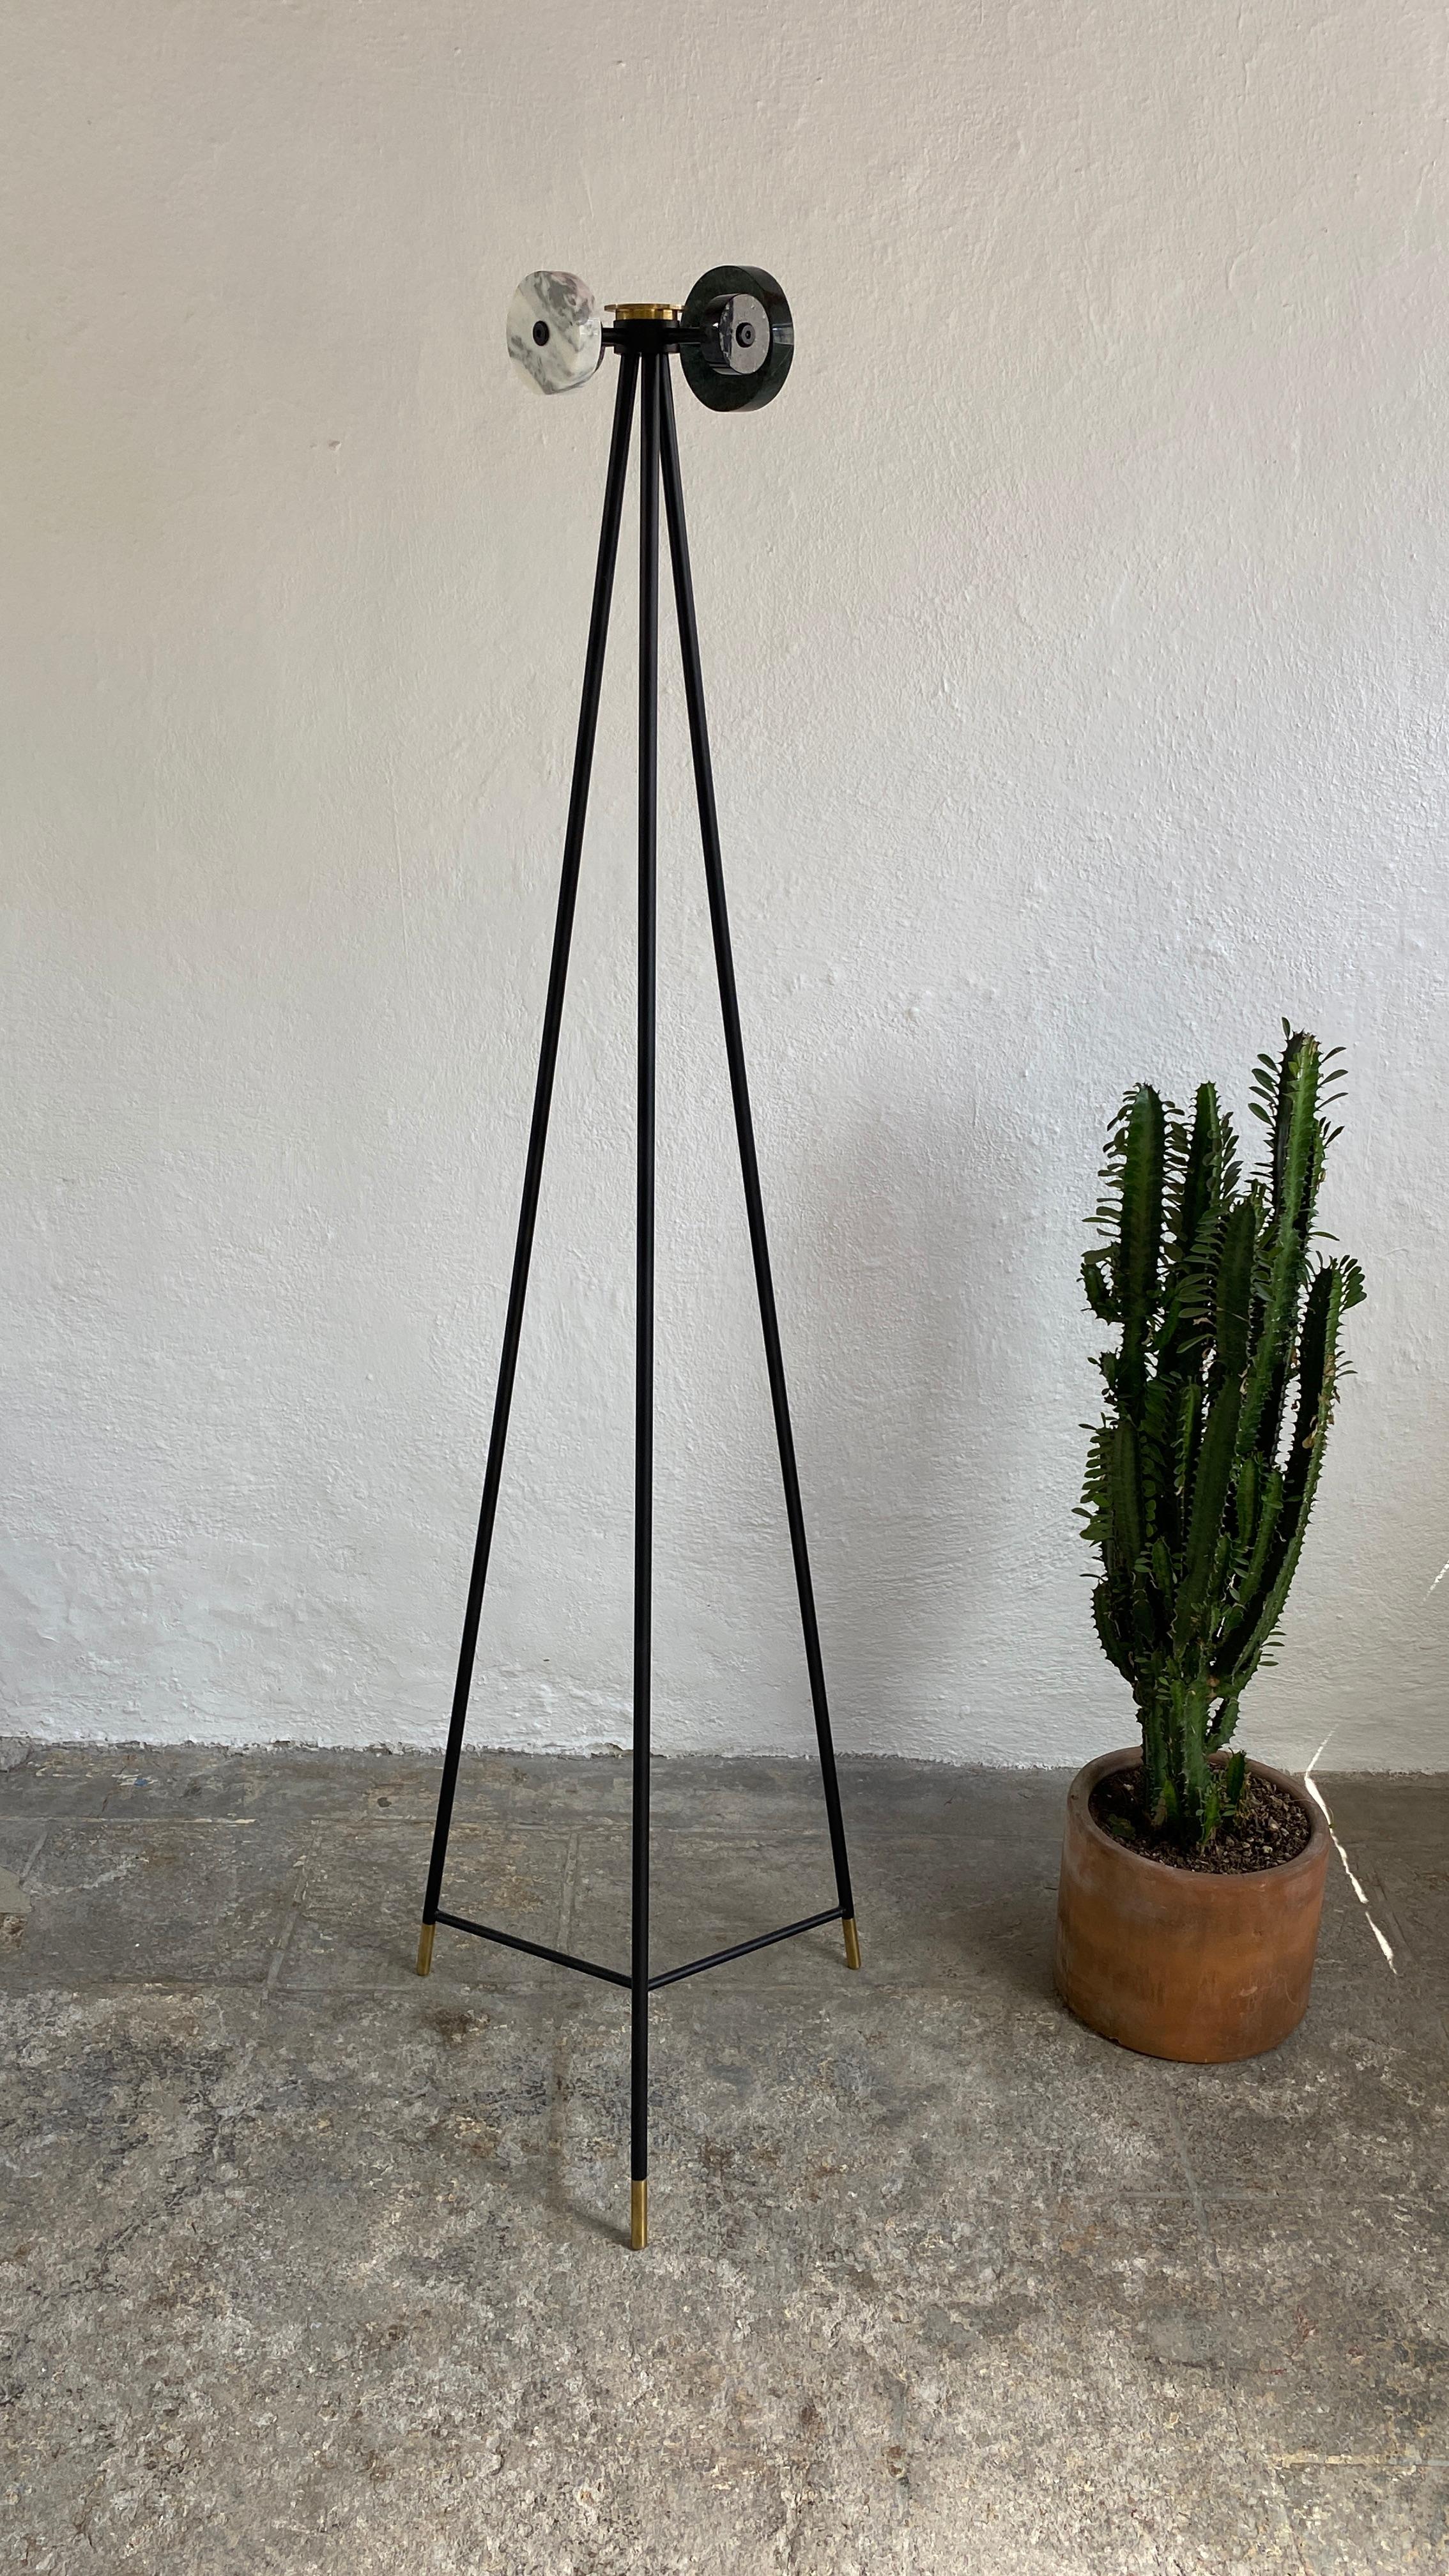 Marble coat stand by Comité de Proyectos
Dimensions: 40 x 40 x 145cm
Materials: Marble, metal, brass details

The hooks of this coat rack are made from leftover marble slabs that we collected from our marble worker's workshop. The body is made